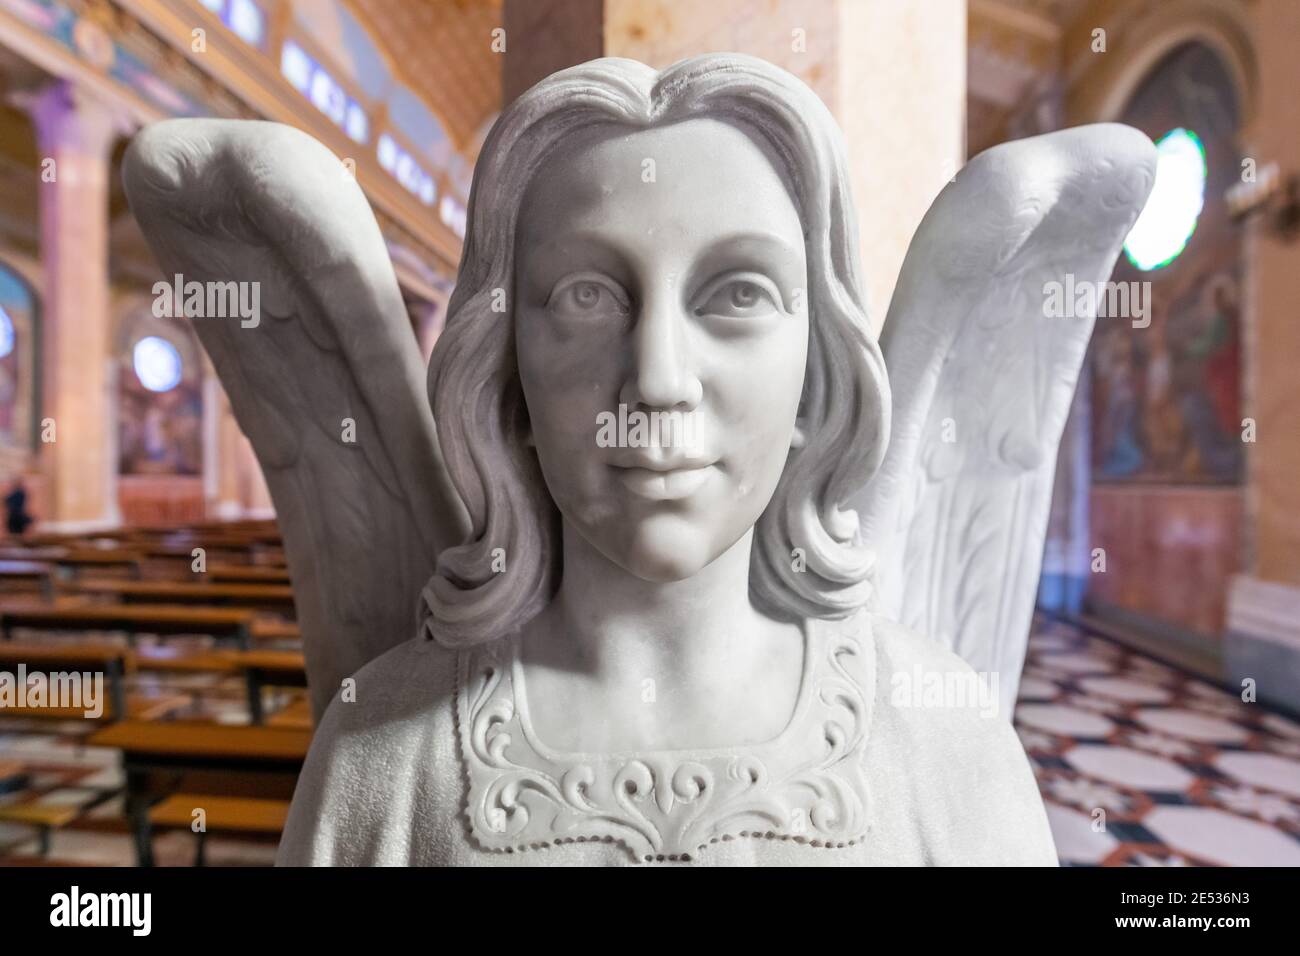 Close up of a white marble statue of a winged angel against the nave of a colorful church Stock Photo